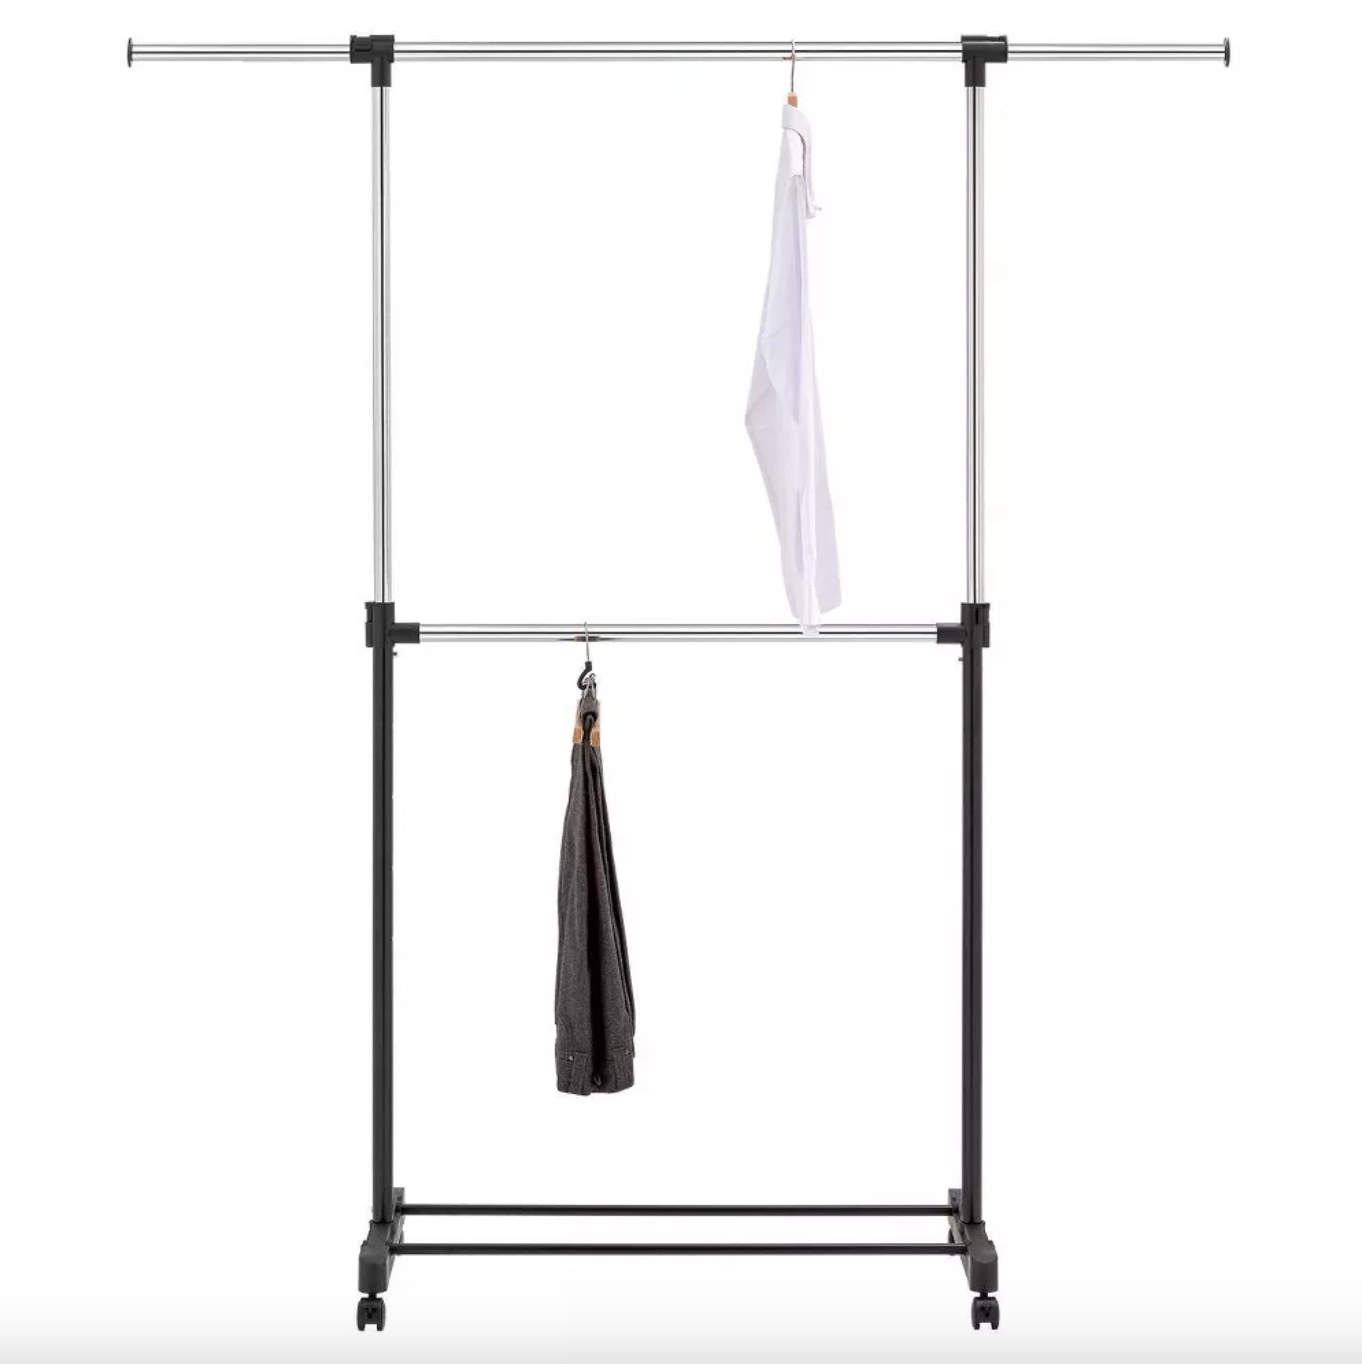 the silver and black rack with two levels. the bottom rail has a black pair of pants hanging on it and the top rail has a white shirt